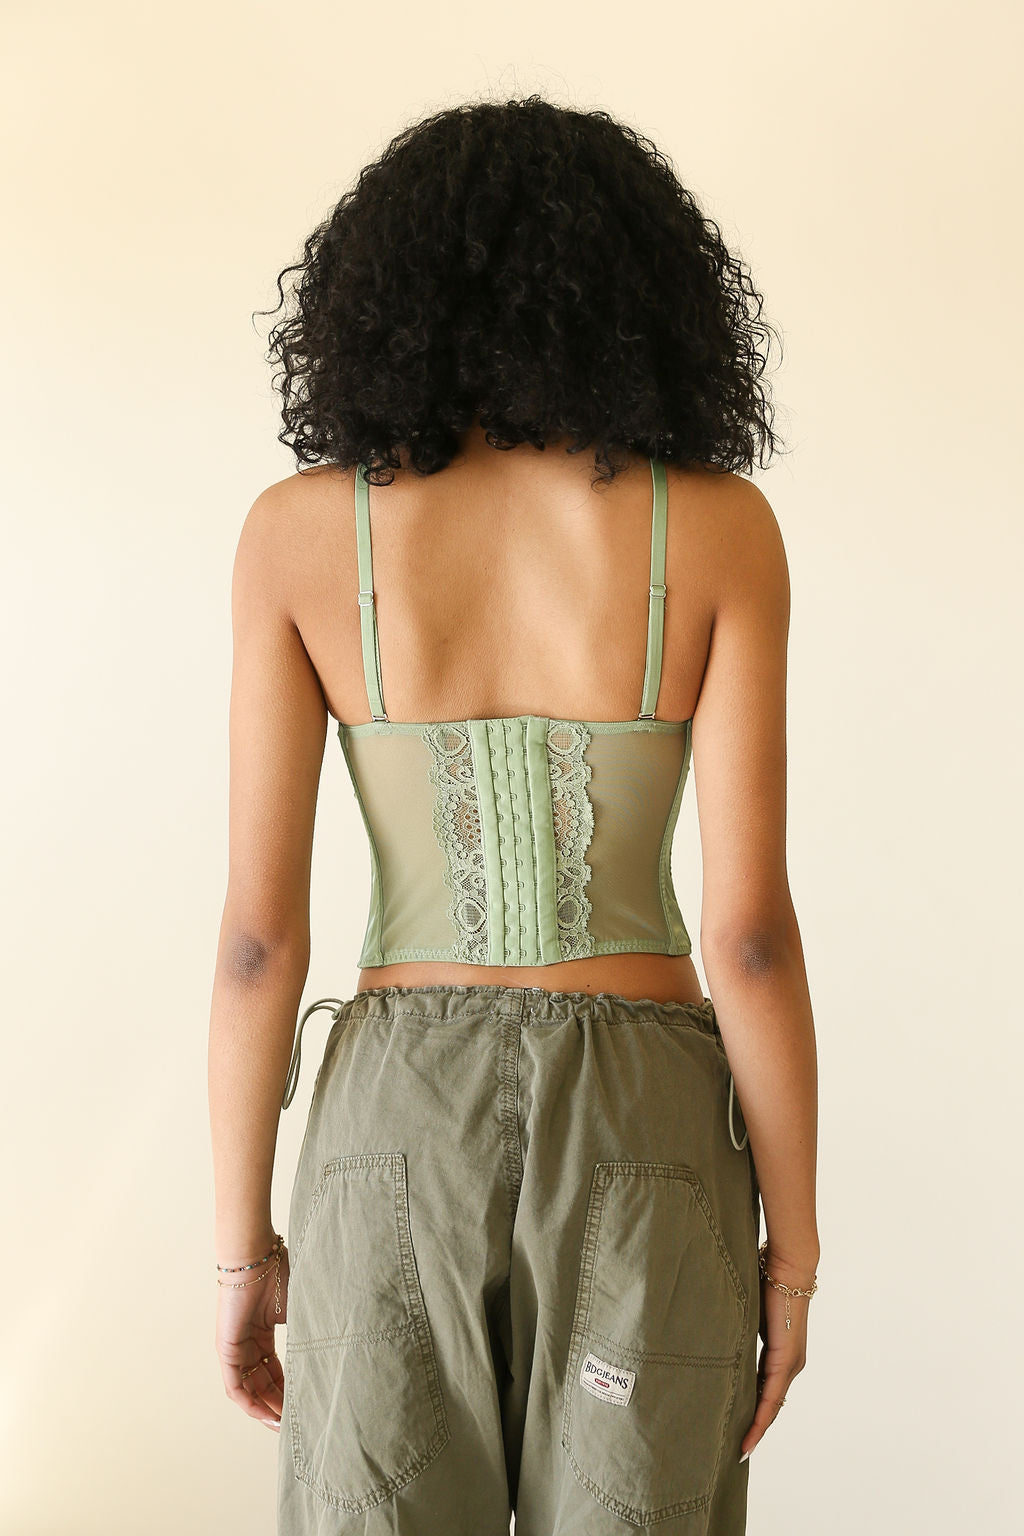 BDG Urban Outfitters Ava Satin Lace & Corset Womens Top - GREEN